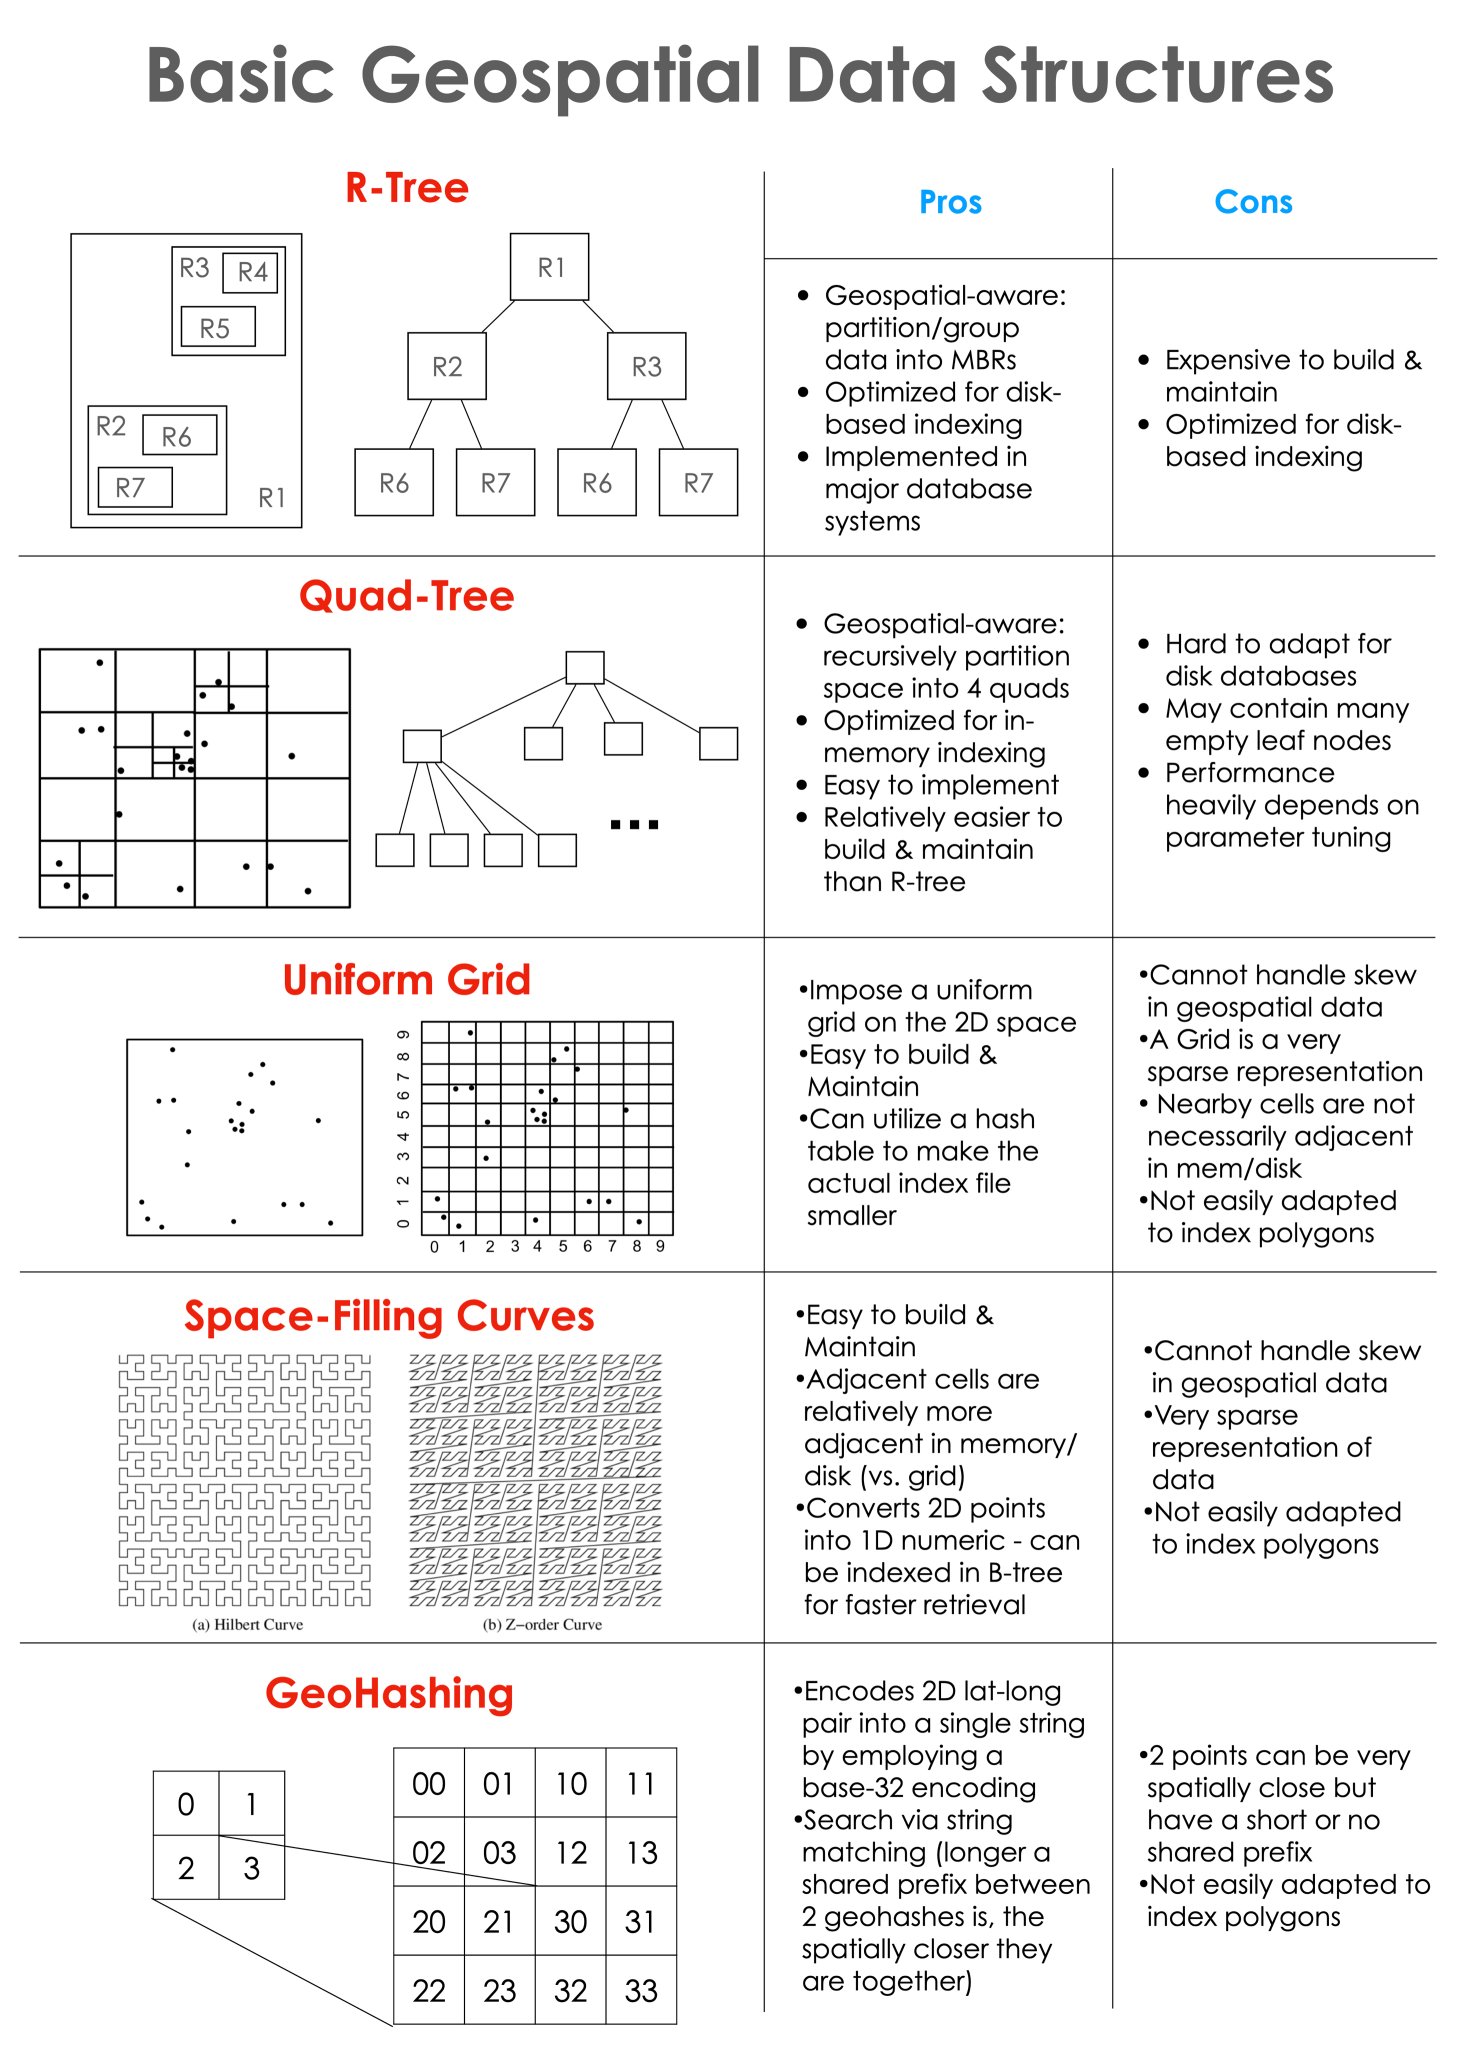 Cheat sheet for the basic geospatial data structures and the pros/cons of each. @MoSarwat